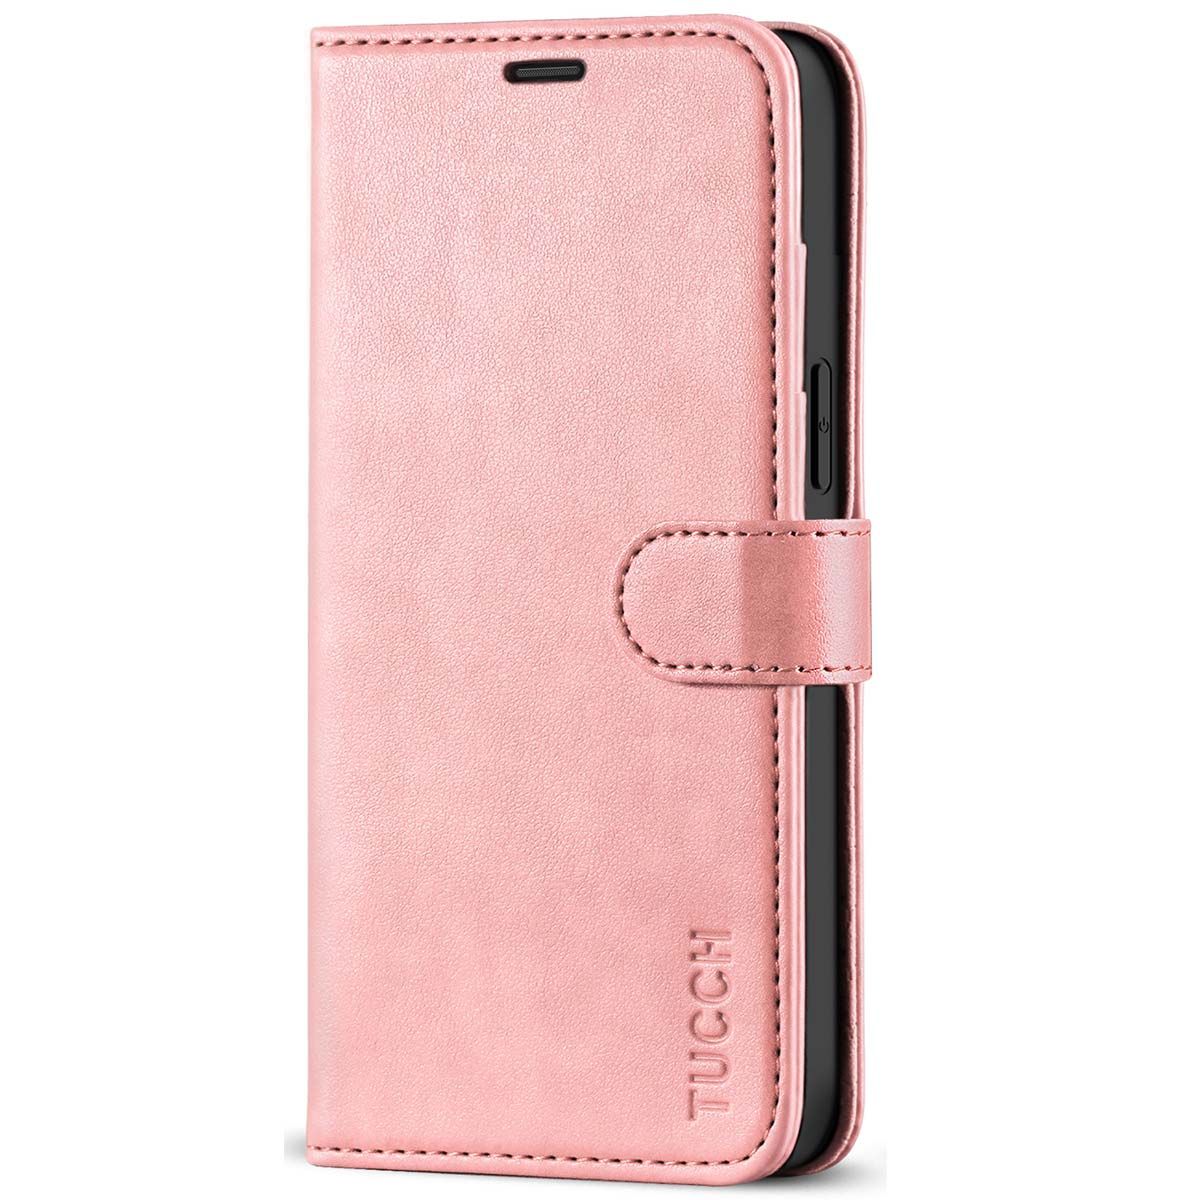 TUCCH iPhone 12 Pro Max Wallet Case, iPhone 12 Pro Max Leather Cover